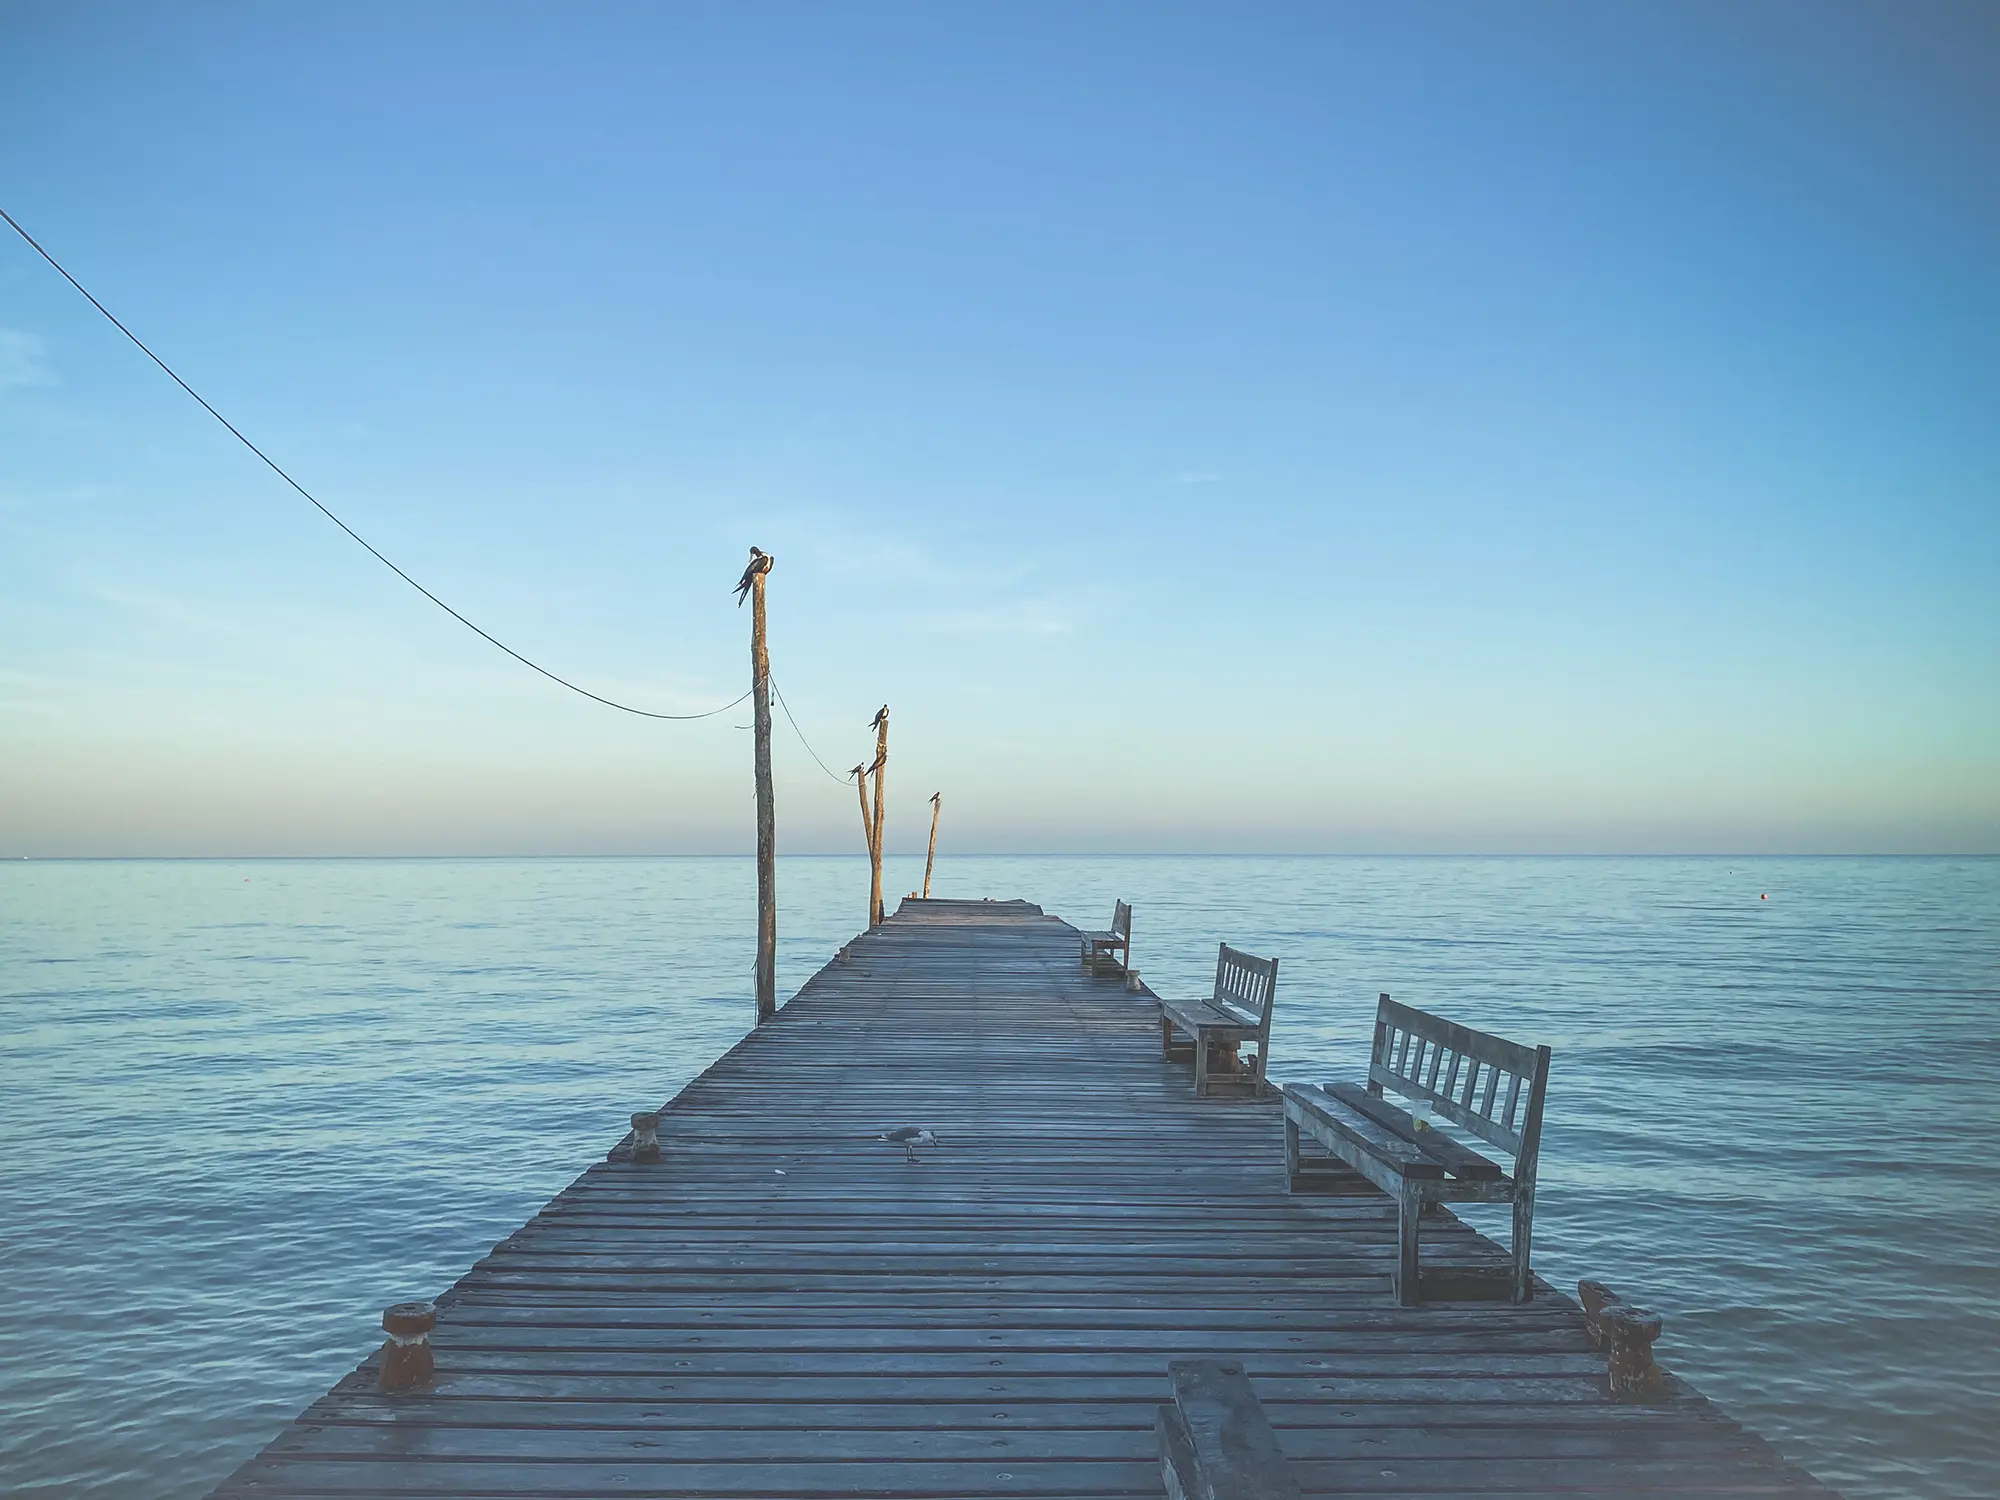 Looking out at a wooden dock stretching into a blue sea at sunrise.